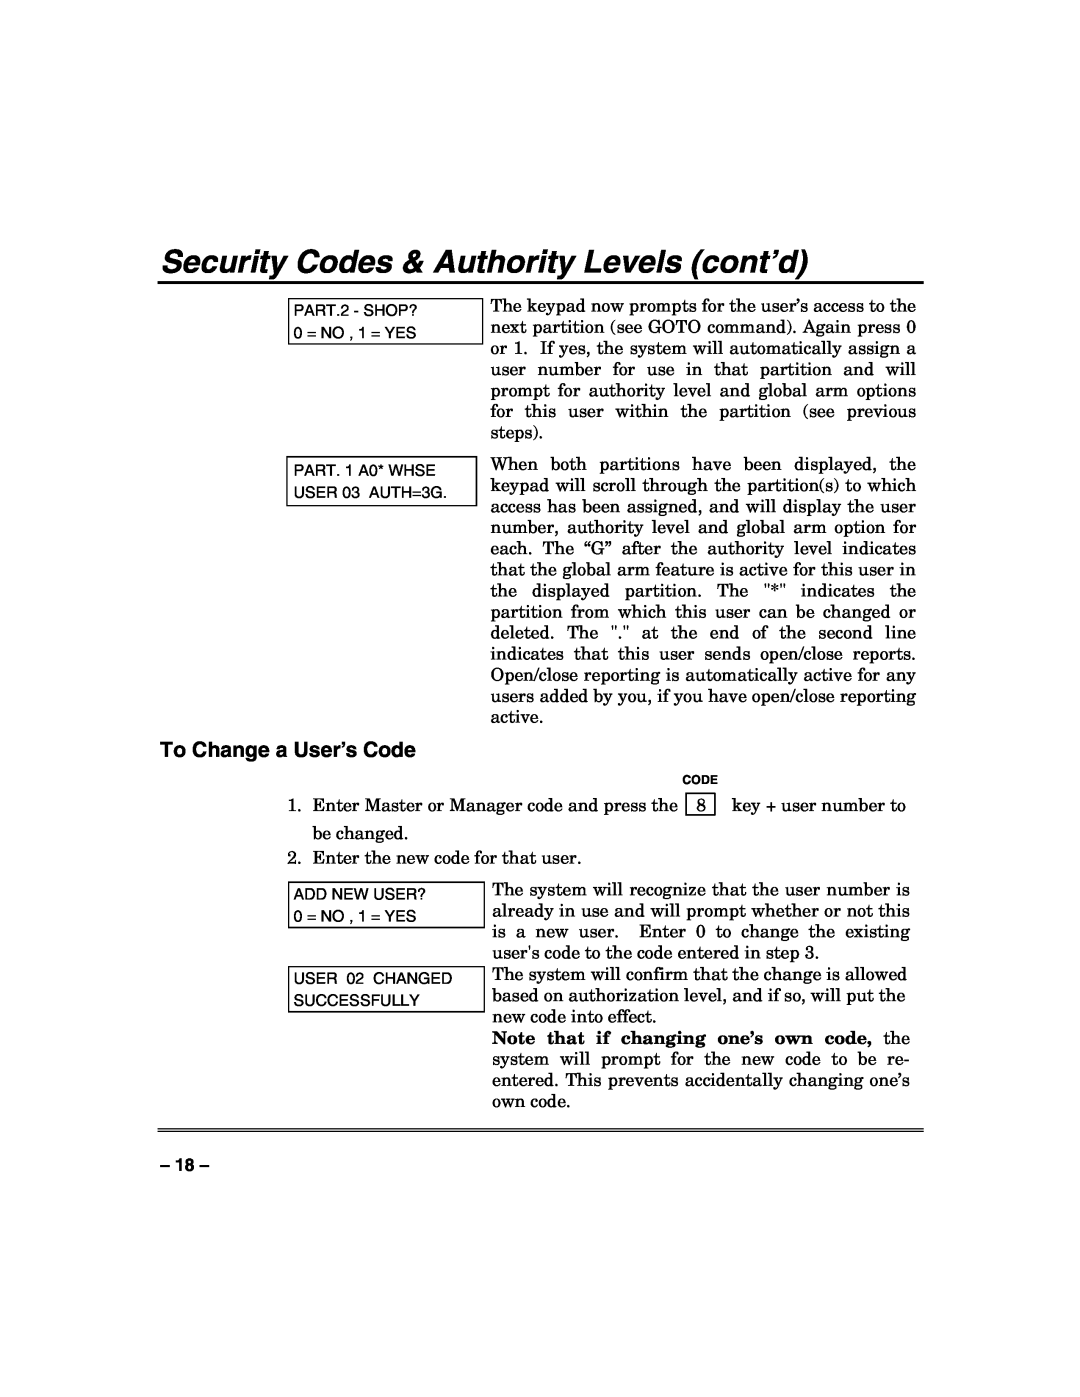 Honeywell N7003V3 manual To Change a User’s Code, Security Codes & Authority Levels cont’d 